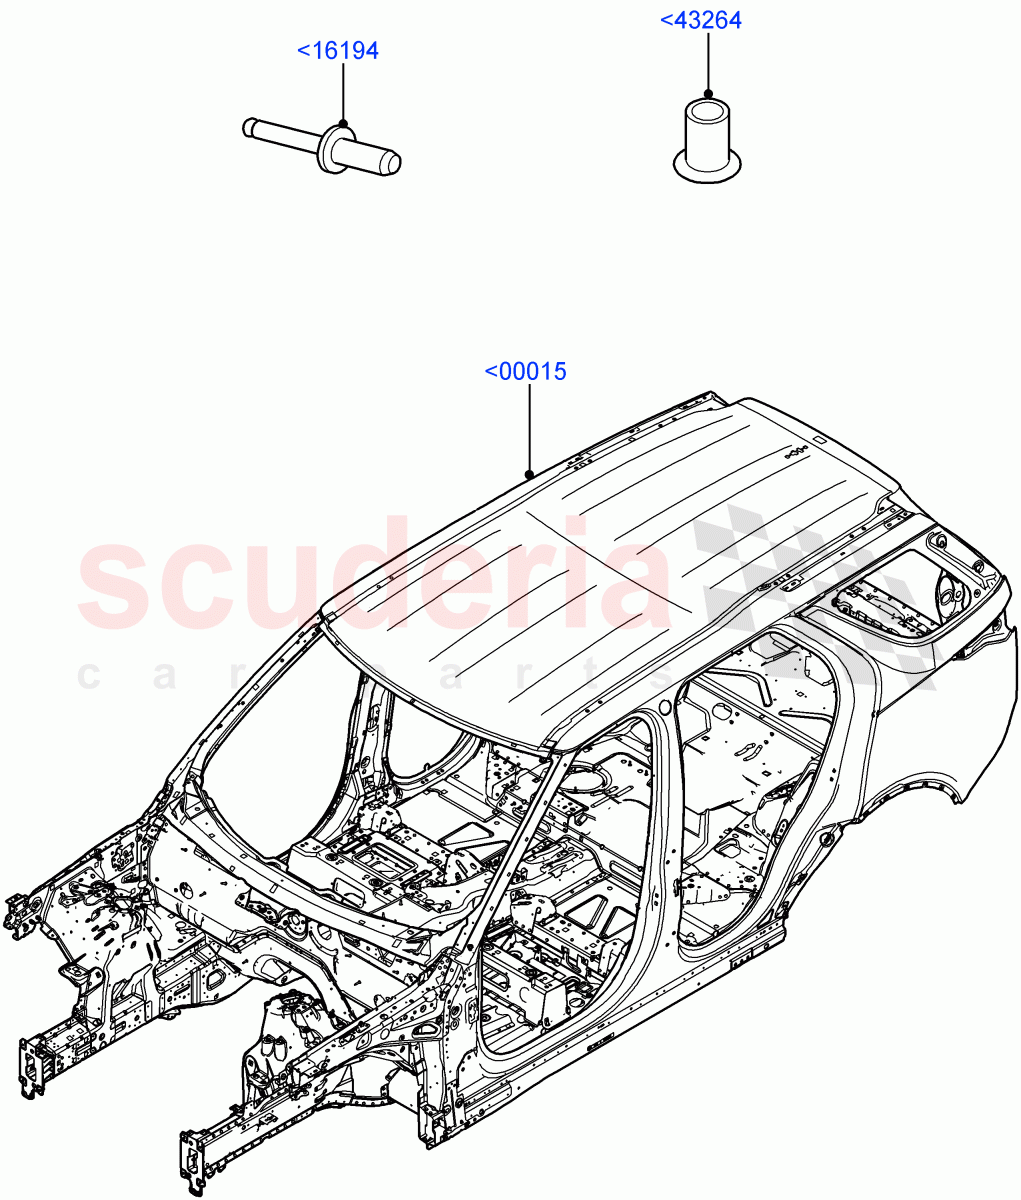 Bodyshell(Solihull Plant Build)((V)FROMHA000001) of Land Rover Land Rover Discovery 5 (2017+) [2.0 Turbo Diesel]